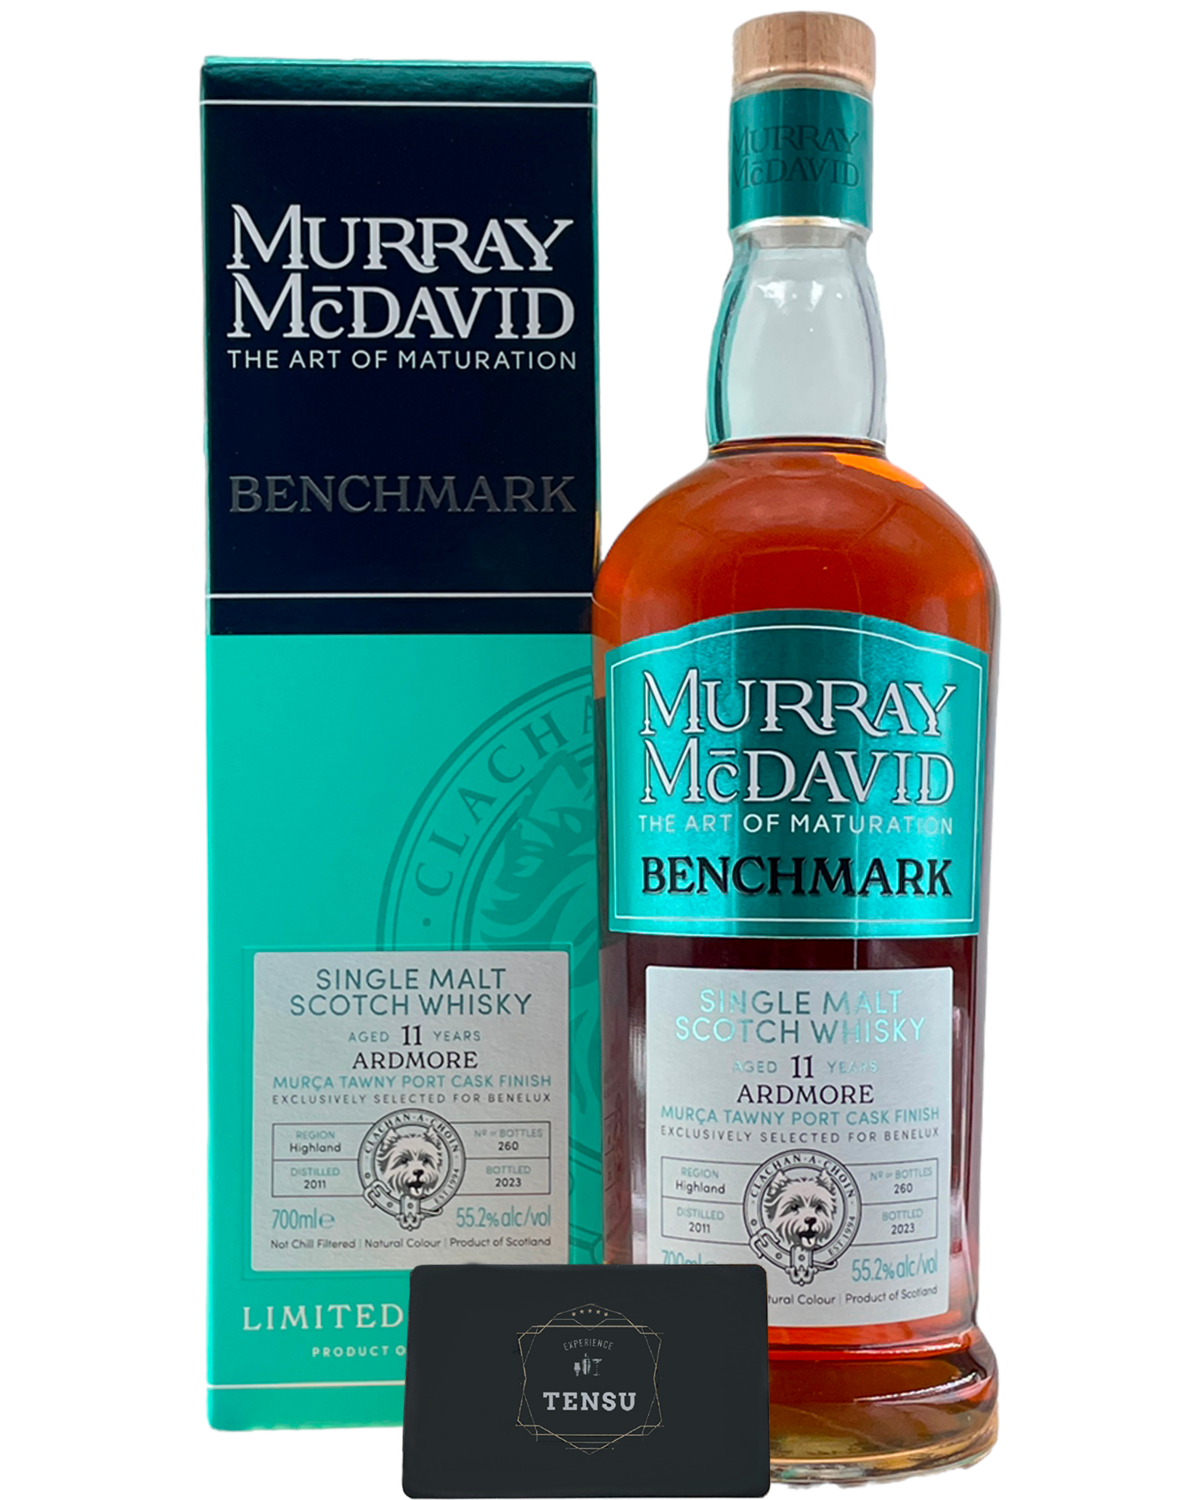 Ardmore 11Y -BENELUX- (2011-2023) Murca Tawny Port Finish BENELUX 55.2 Limited Release - Benchmark "Murray McDavid"